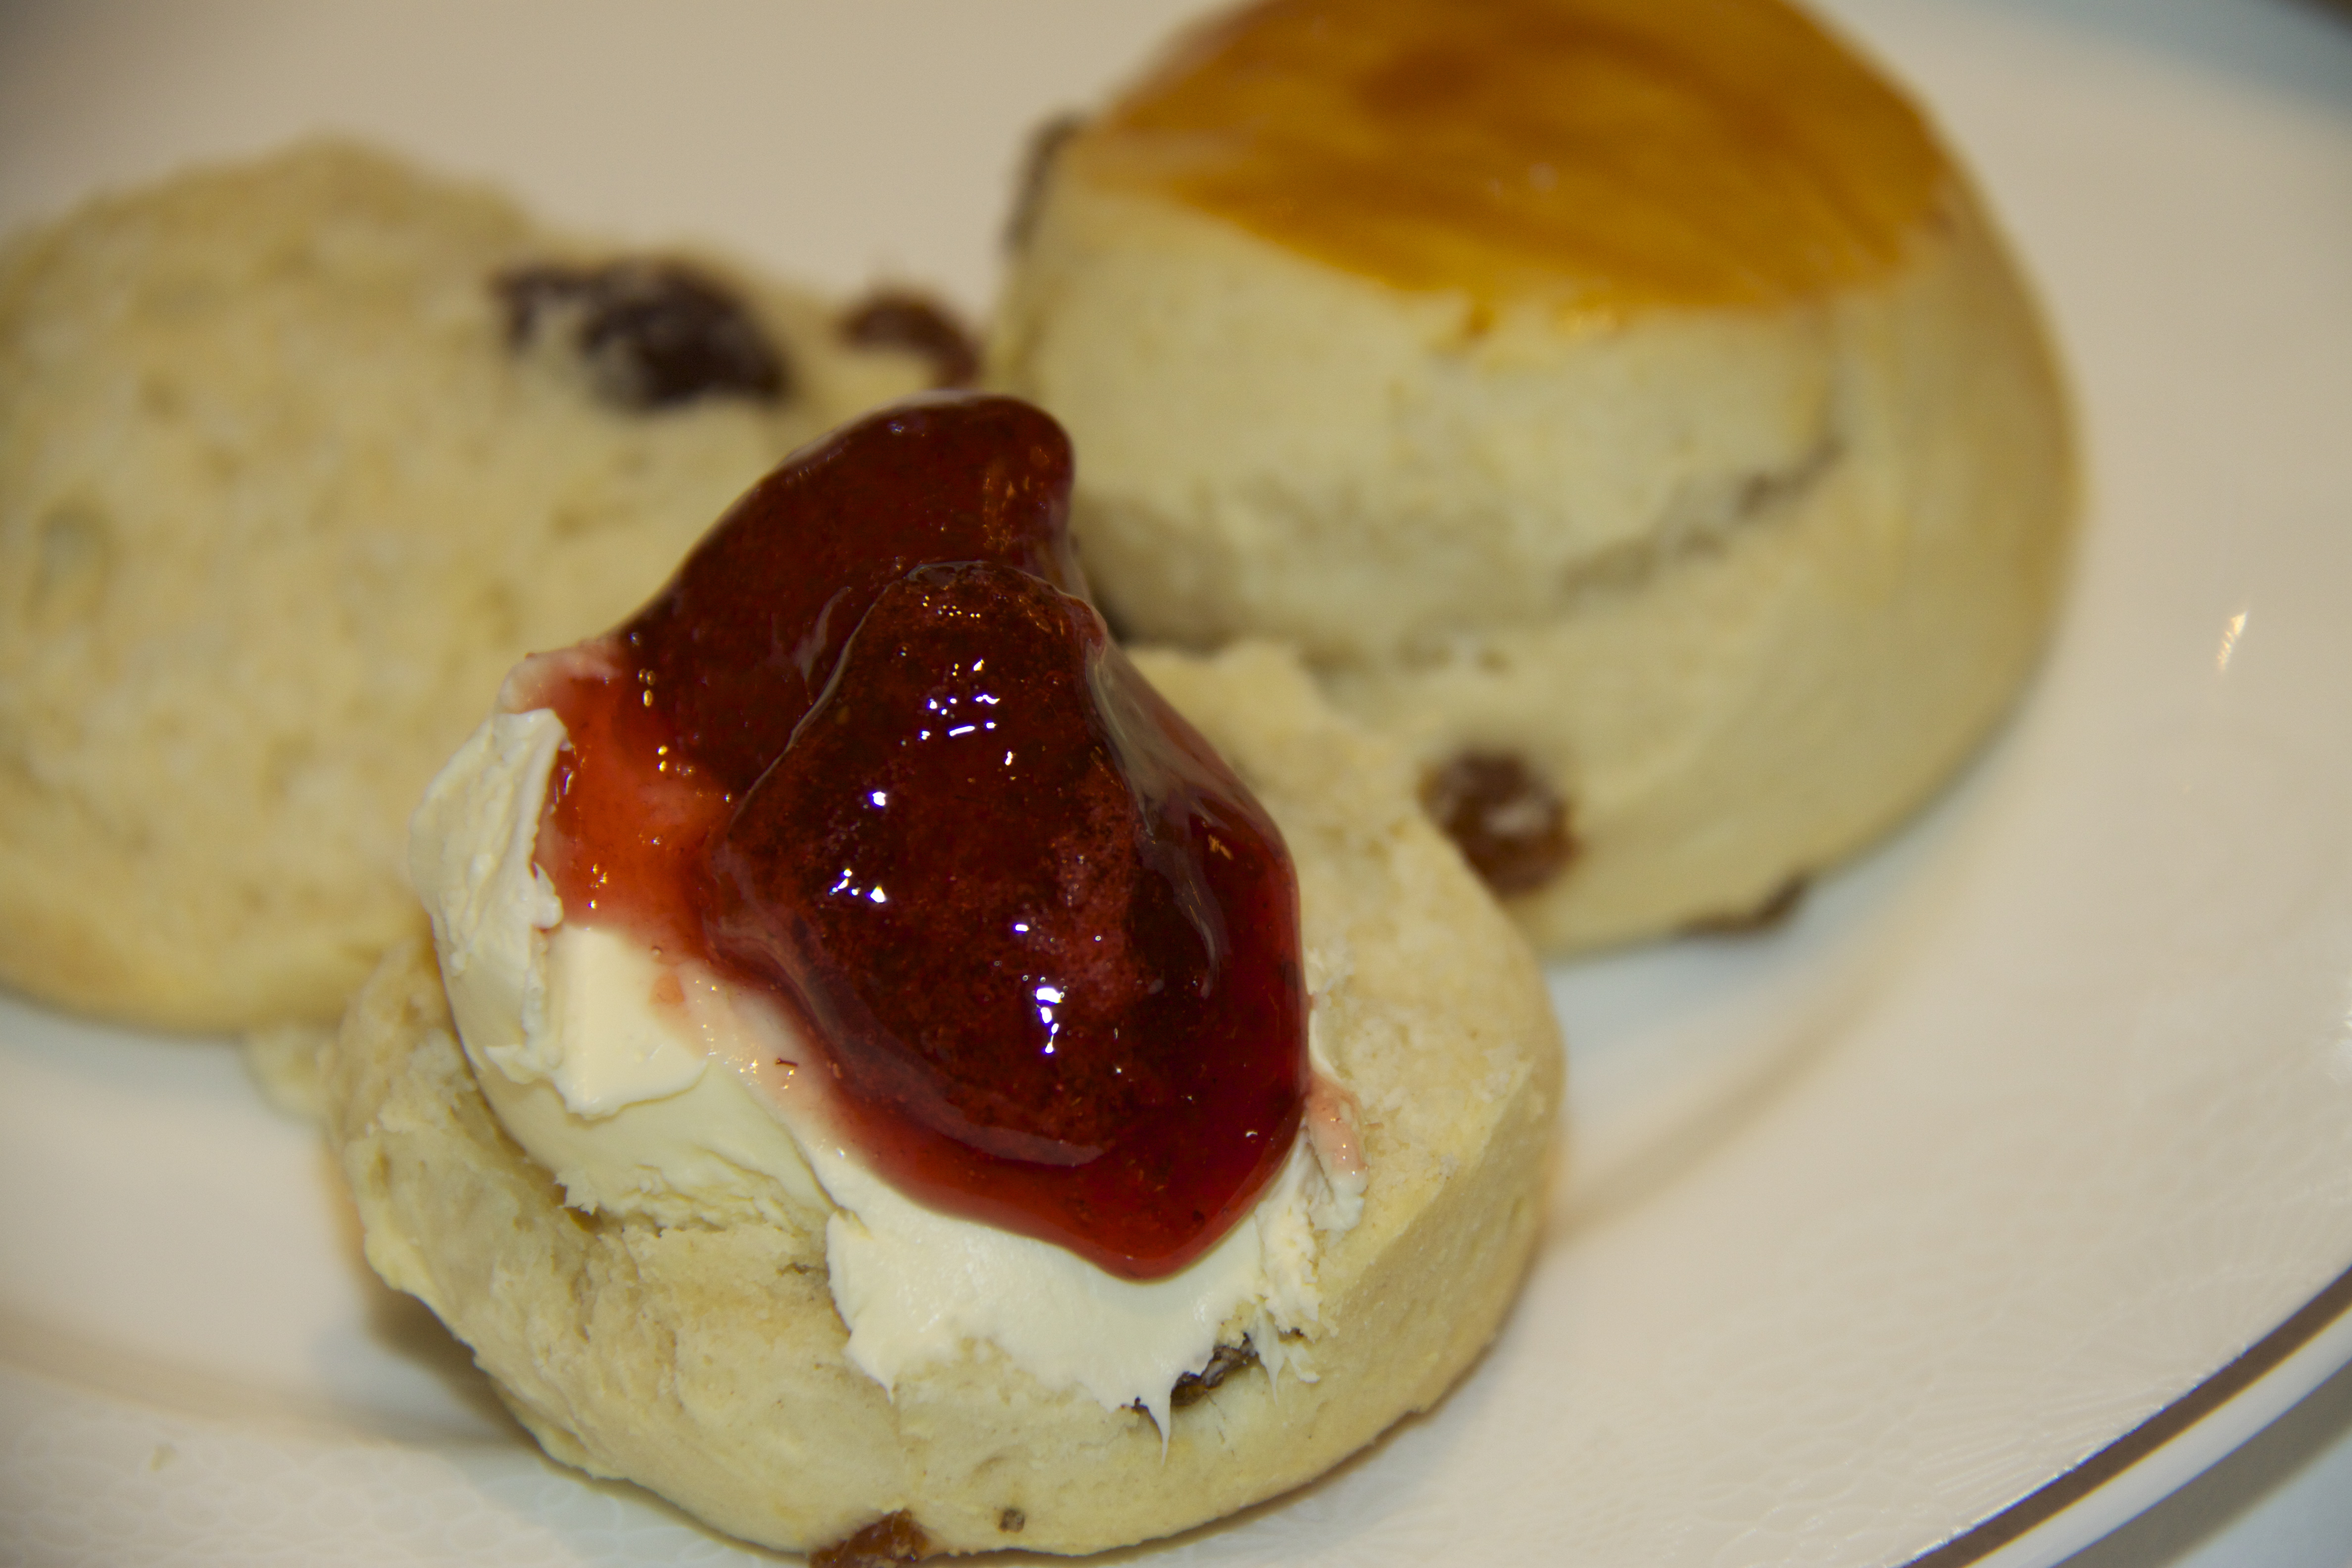 Clotted cream and jam topped scones